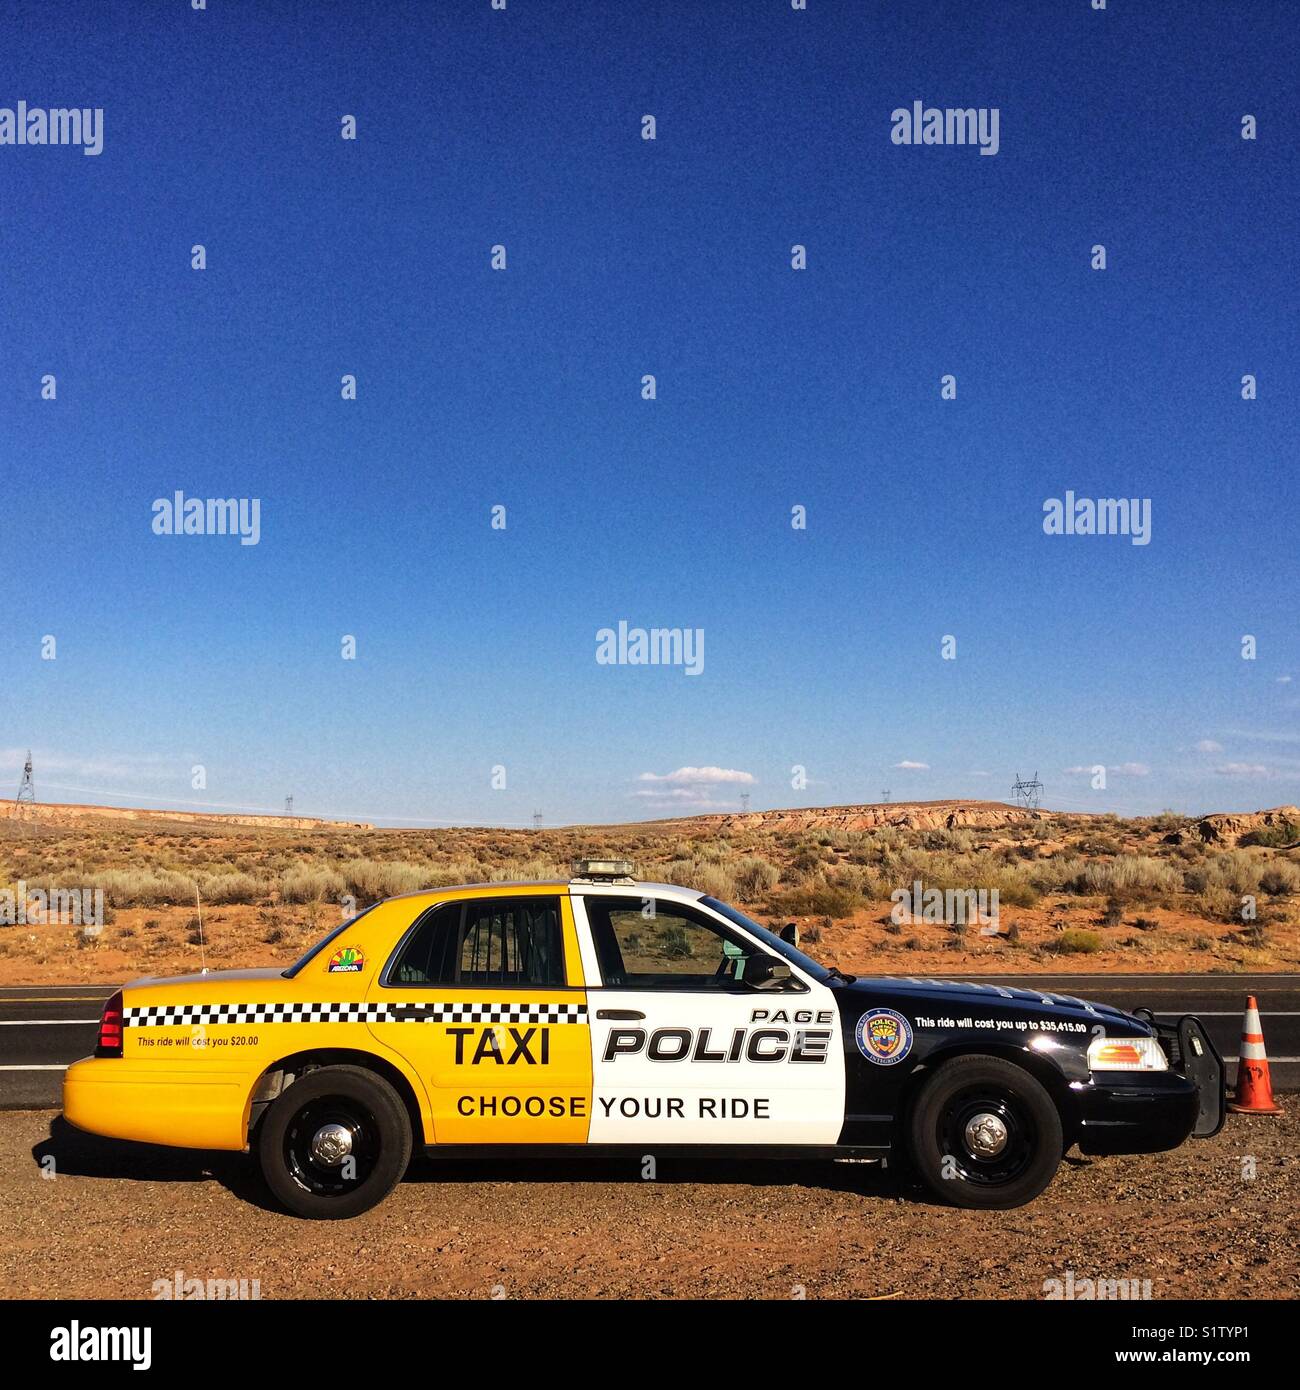 Taxi & Police car in Page, Arizona, USA A police car painted partially as a taxi, part of a campaign against drunk driving Stock Photo